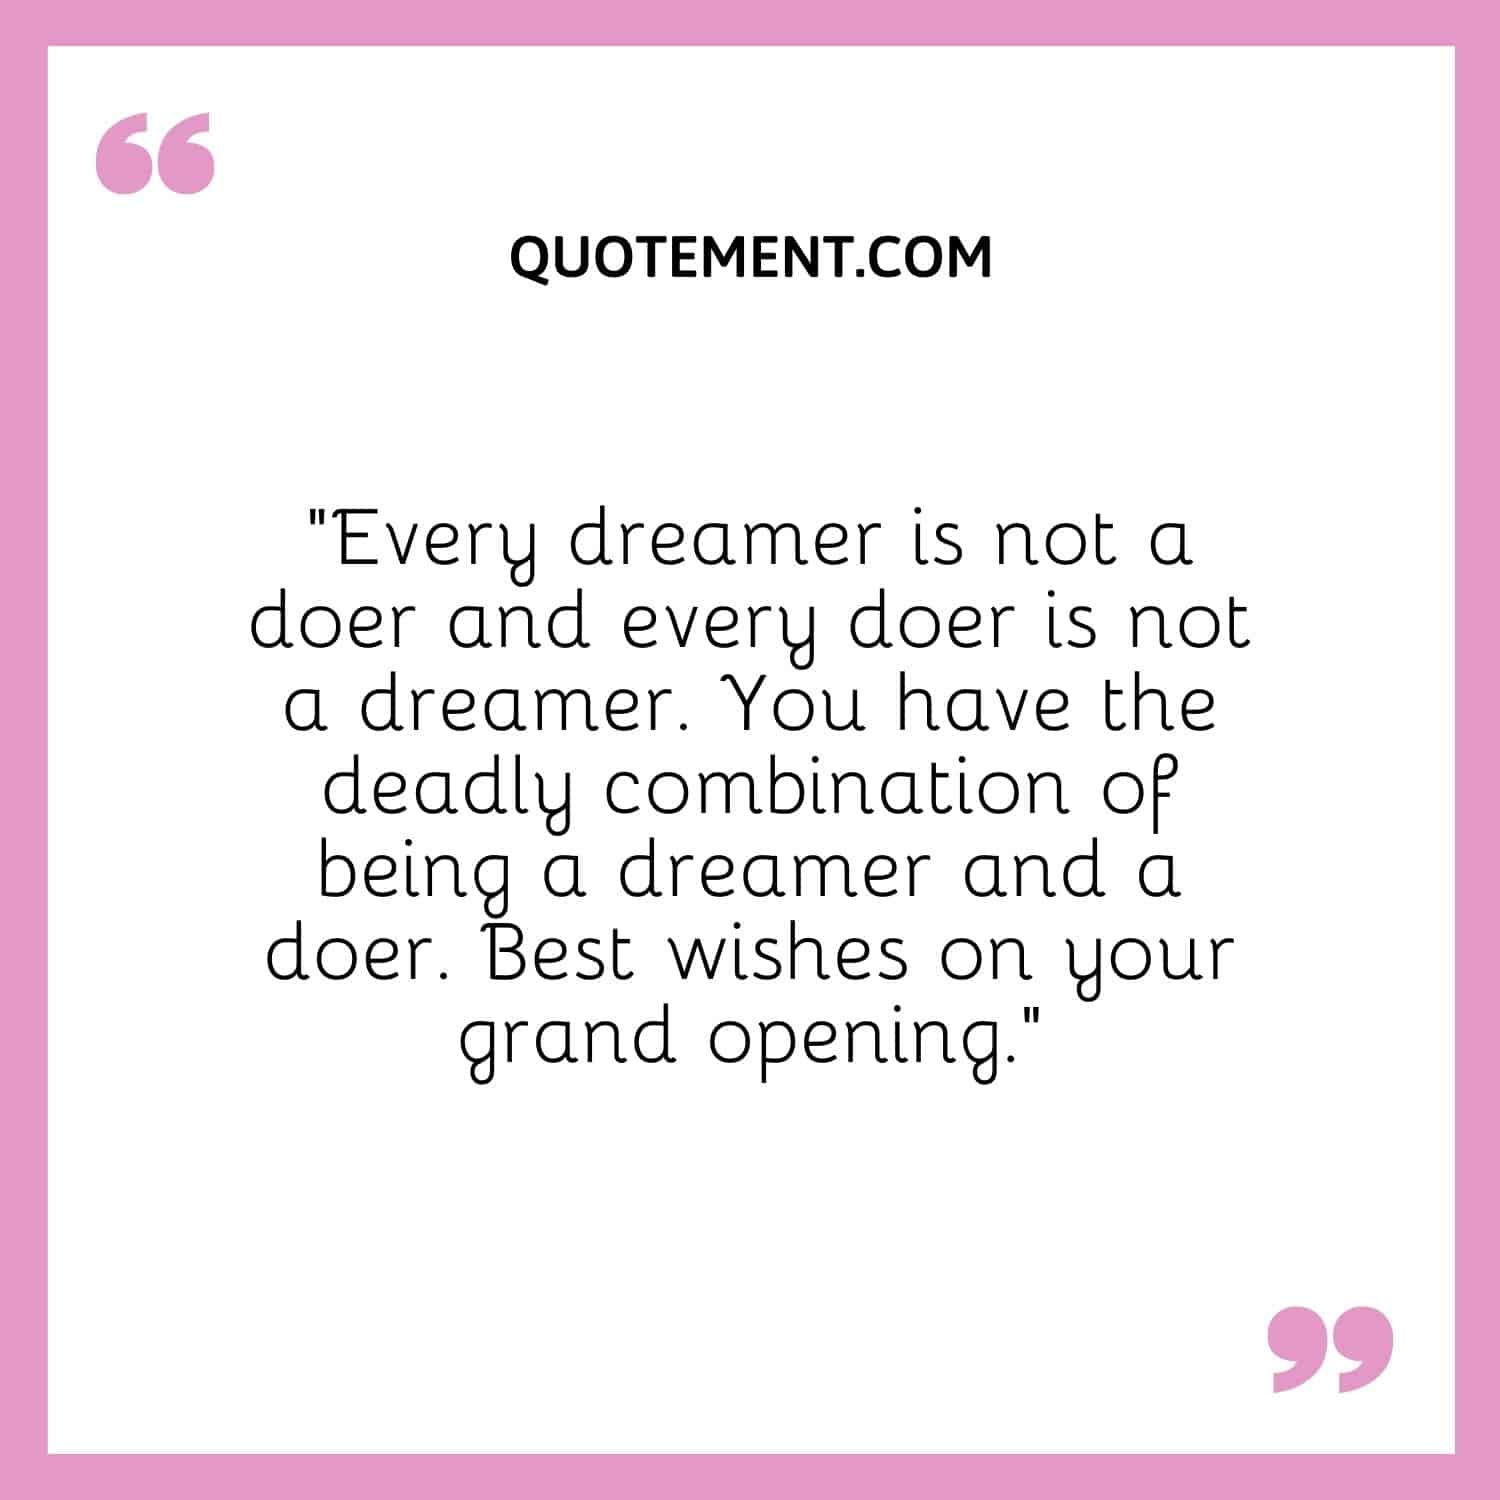 Every dreamer is not a doer and every doer is not a dreamer